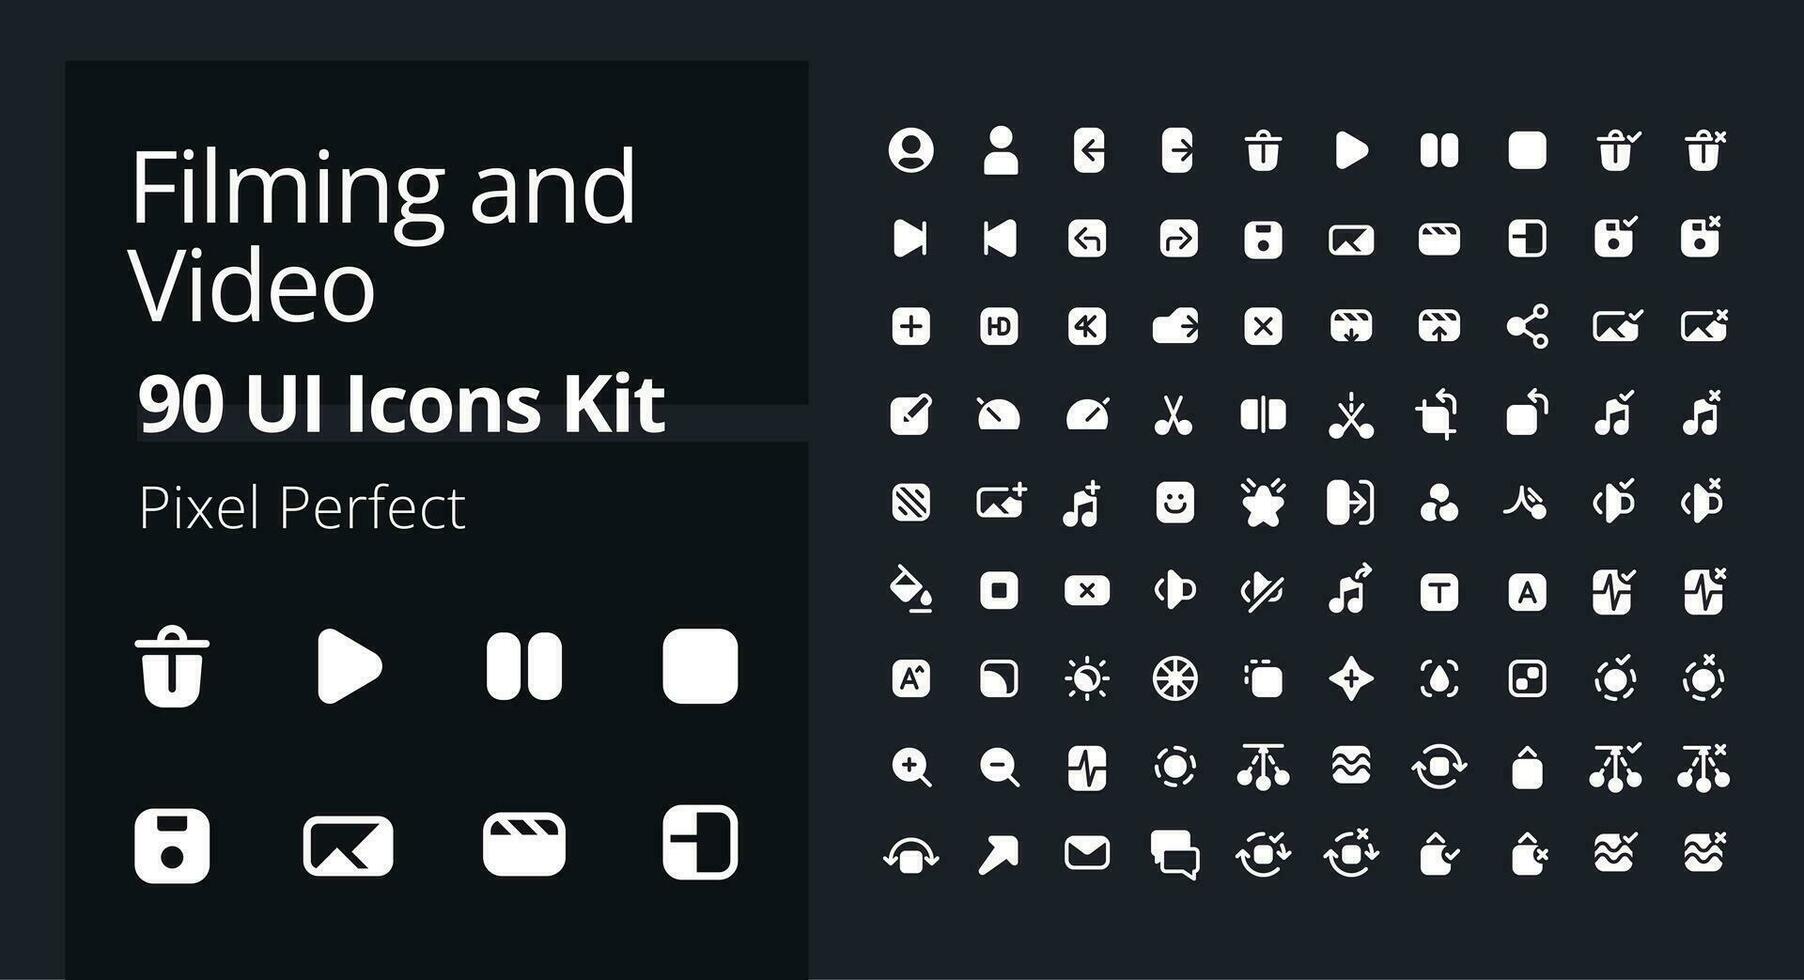 Video production white pixel perfect solid ui icons pack. Filmmaking software. Footage settings. Silhouette symbols for dark theme. Glyph pictograms kit on black background. Vector isolated images